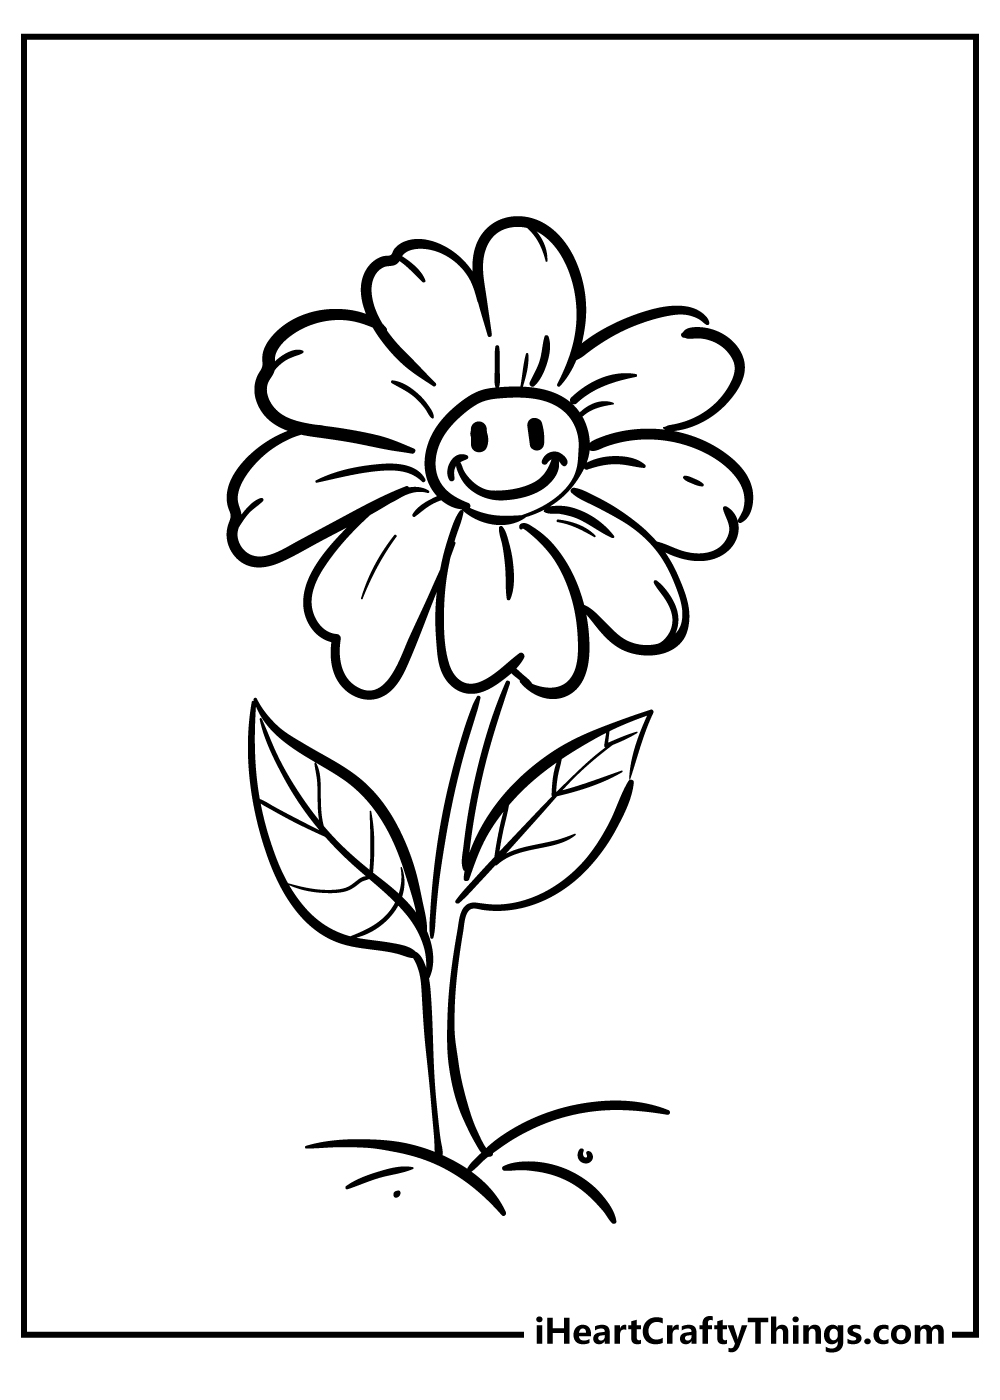 Daisy Coloring Pages free pdf download